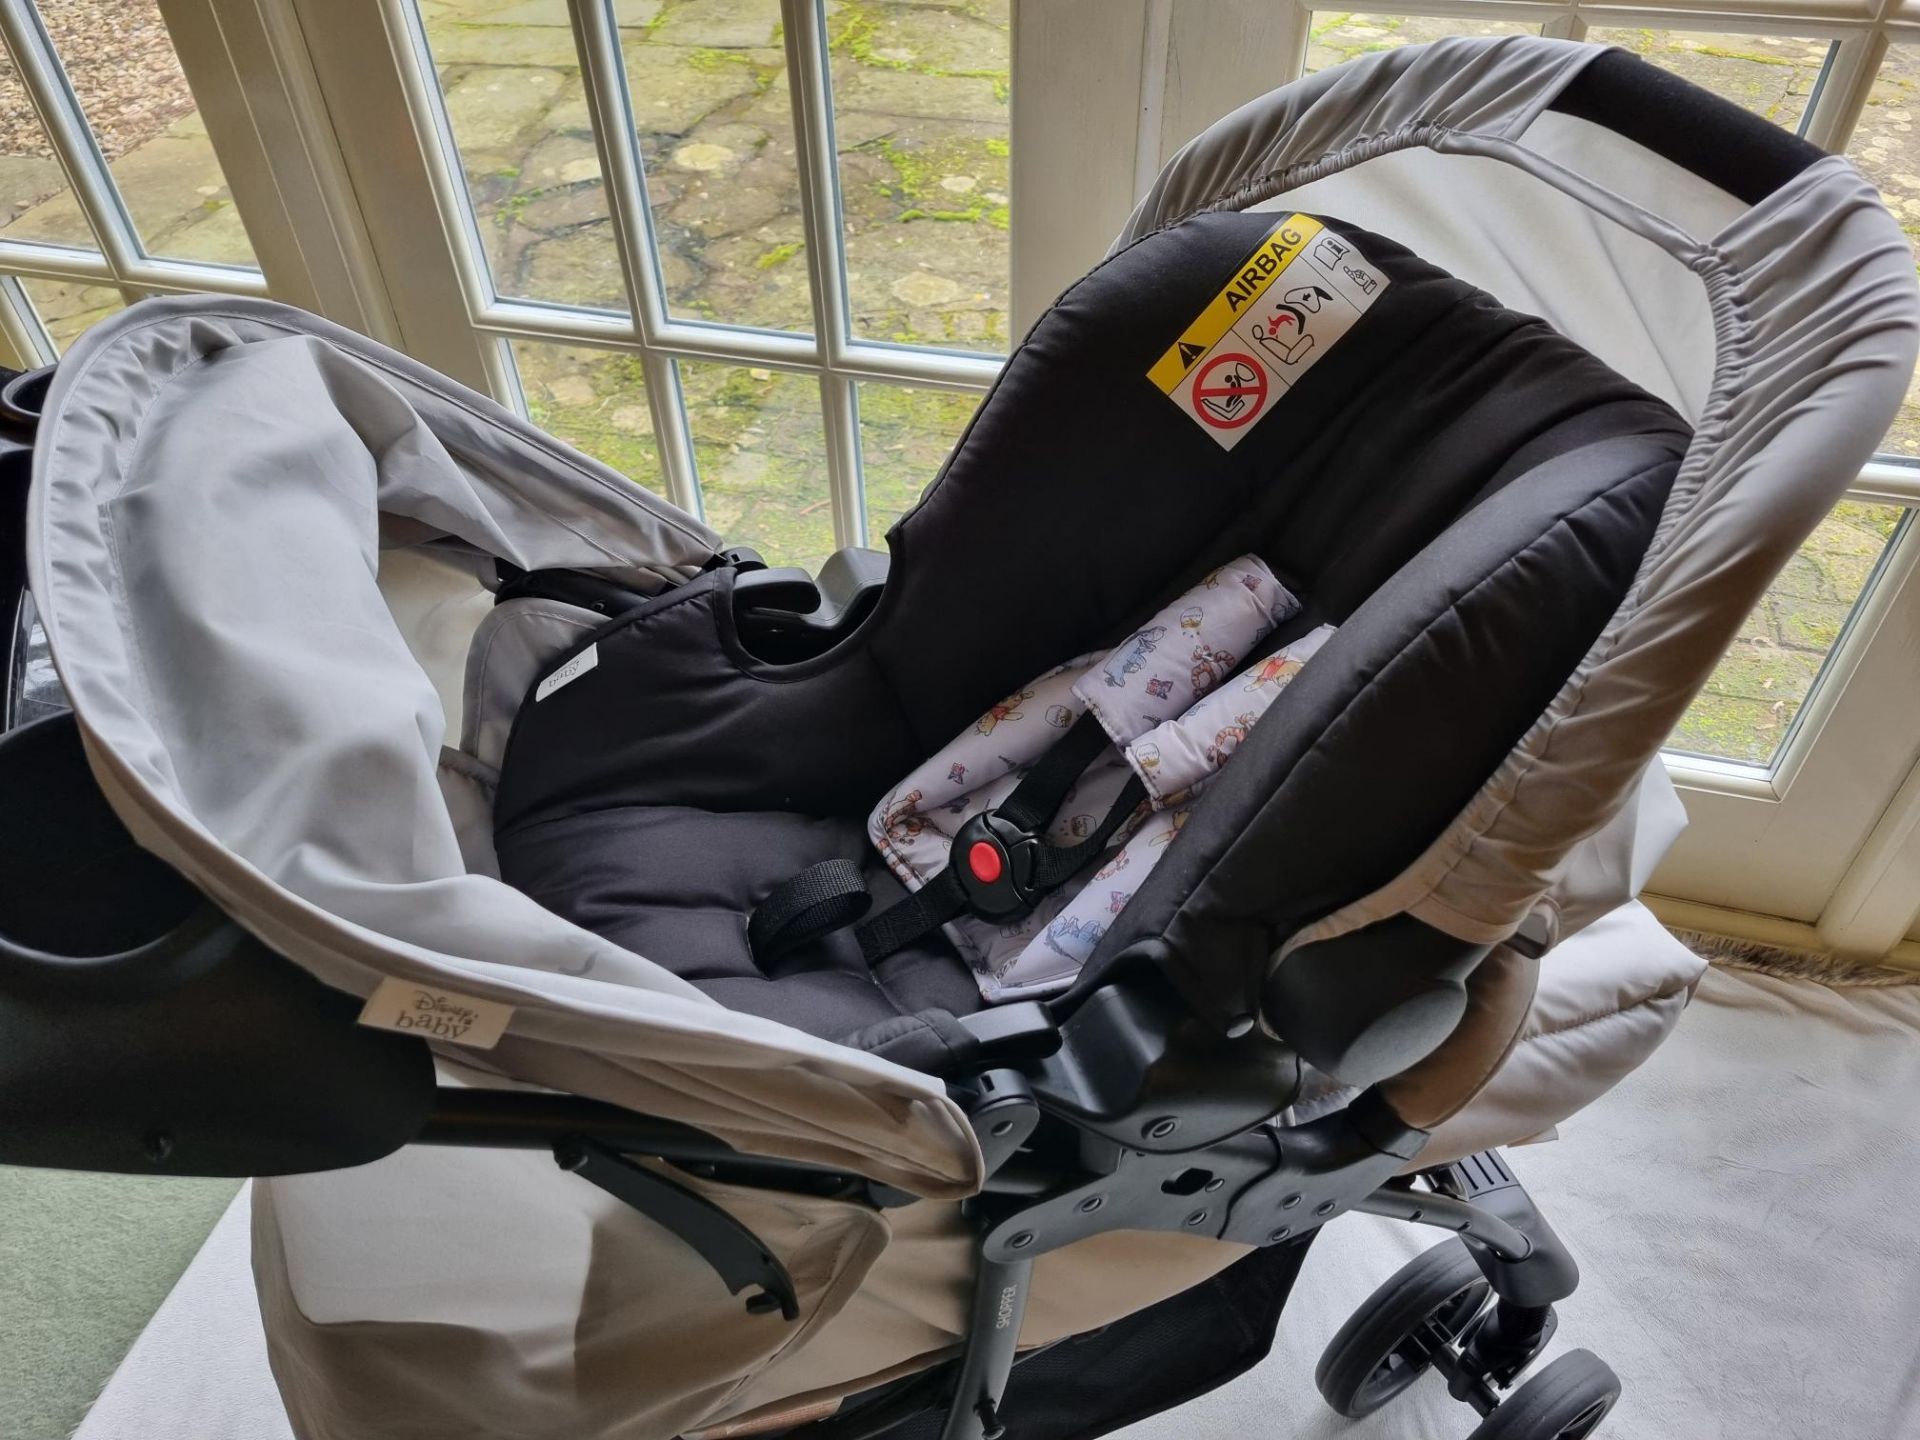 Hauck Disney Pushchair Travel System, Highchair, Tommee Tippee bottle warmer and case, playmat, toys - Image 9 of 24